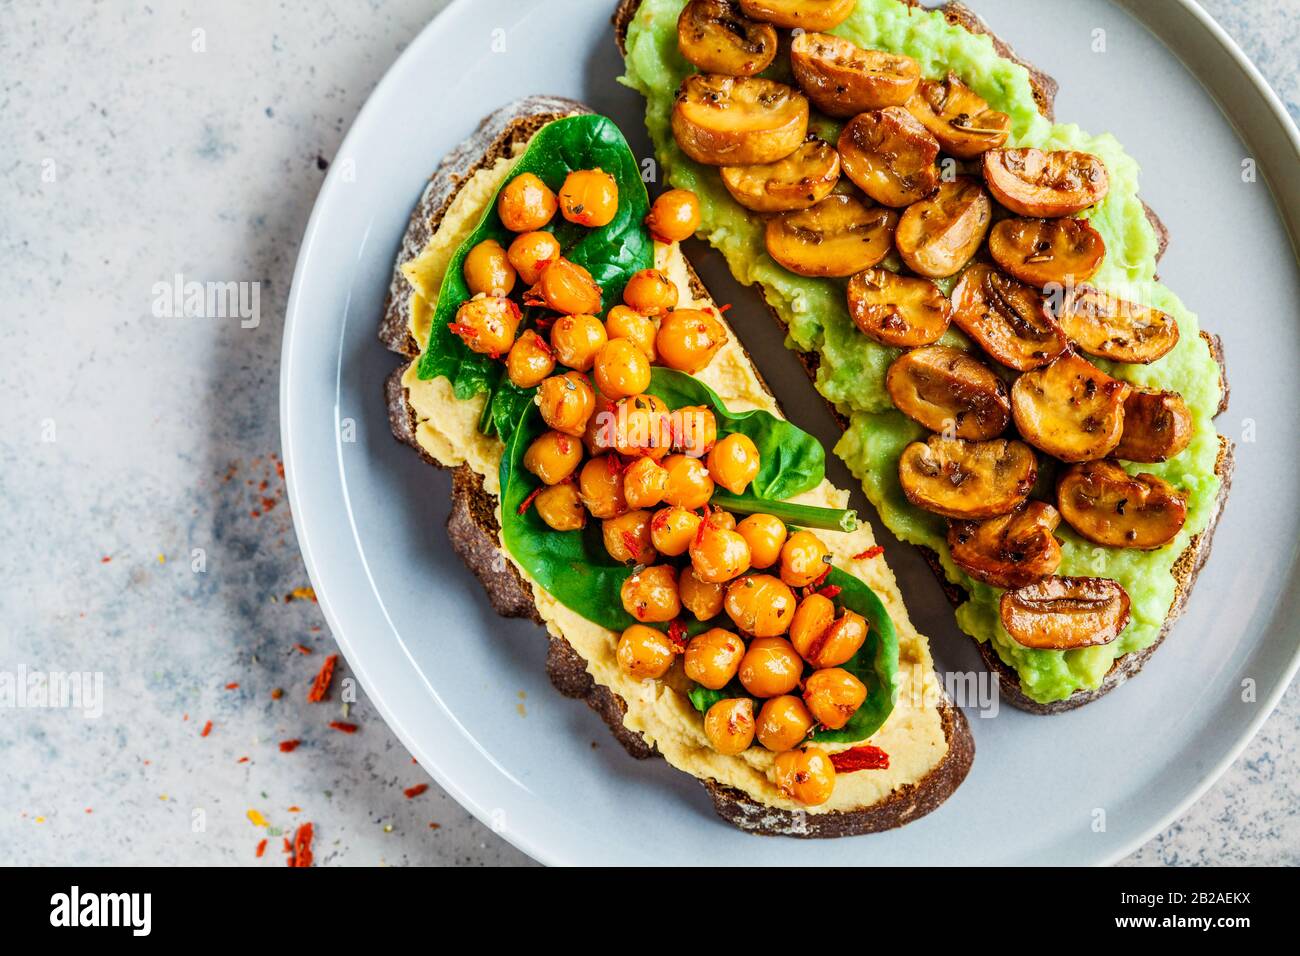 Vegan Foodie High Resolution Stock Photography and Images - Alamy